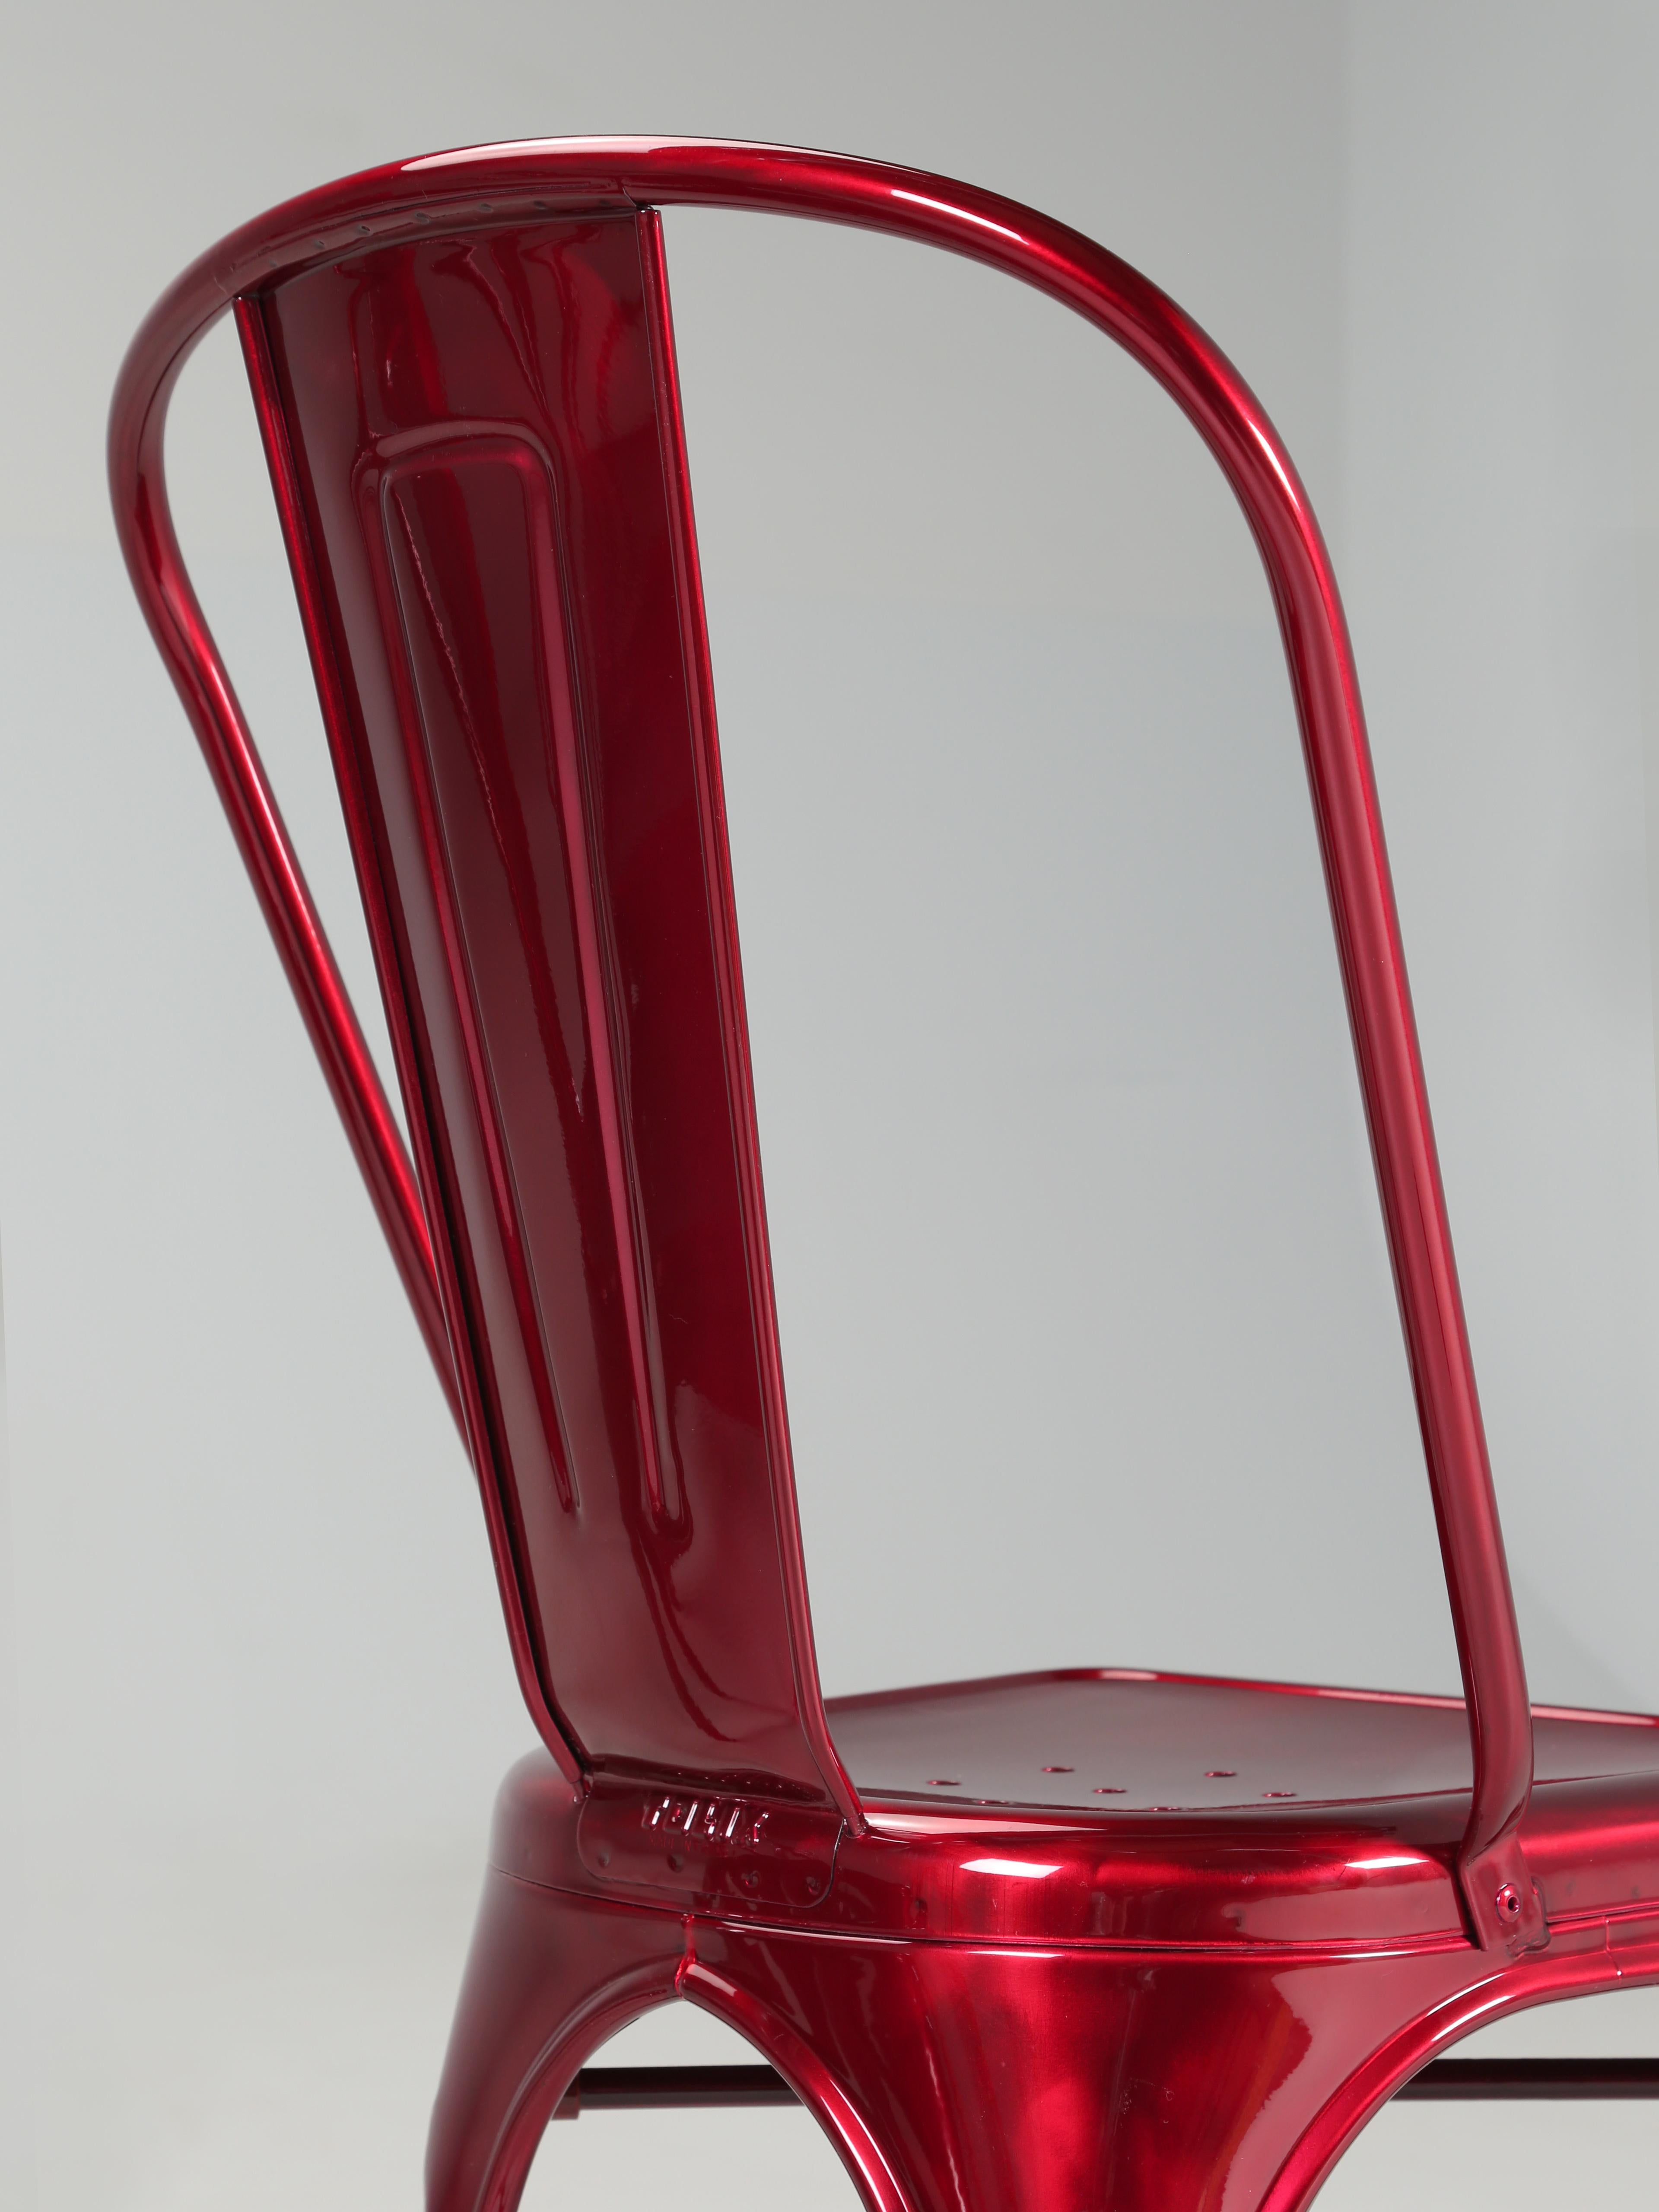 Contemporary Tolix Set of (4) Steel Stacking Chairs in a Brilliant Candy Apple Red Metallic